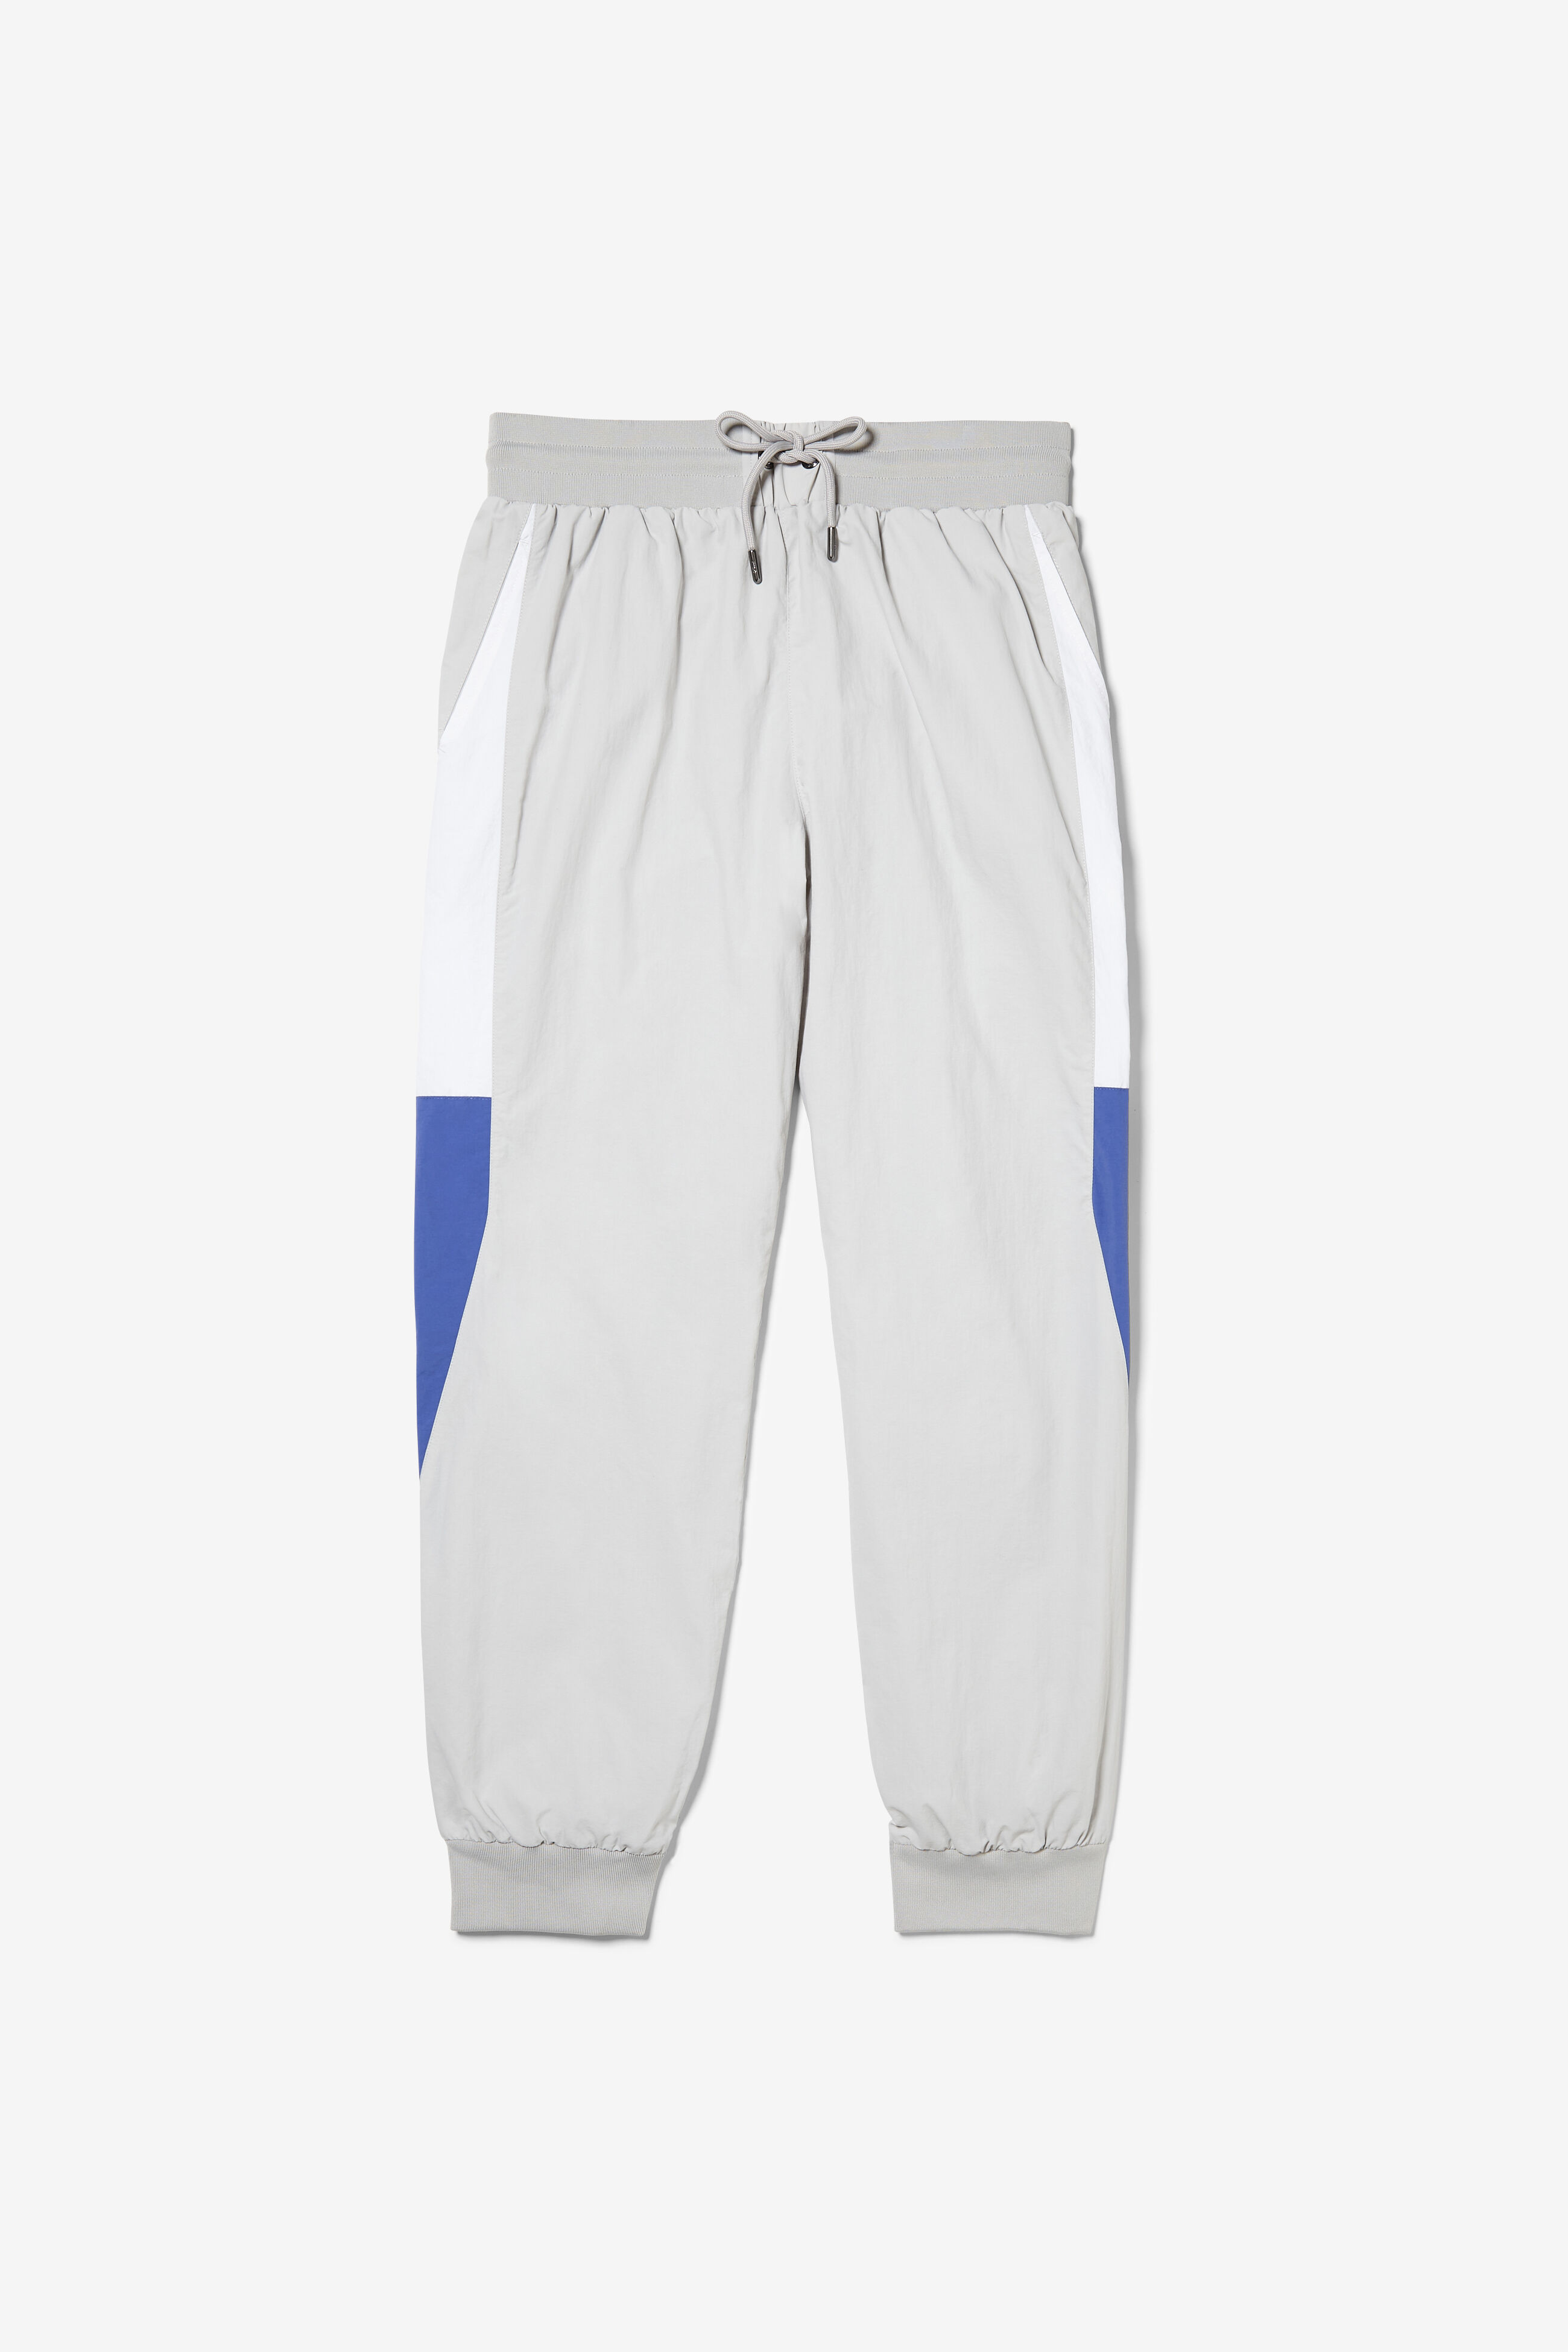 P.E Nation High Dive Track Pants | Anthropologie